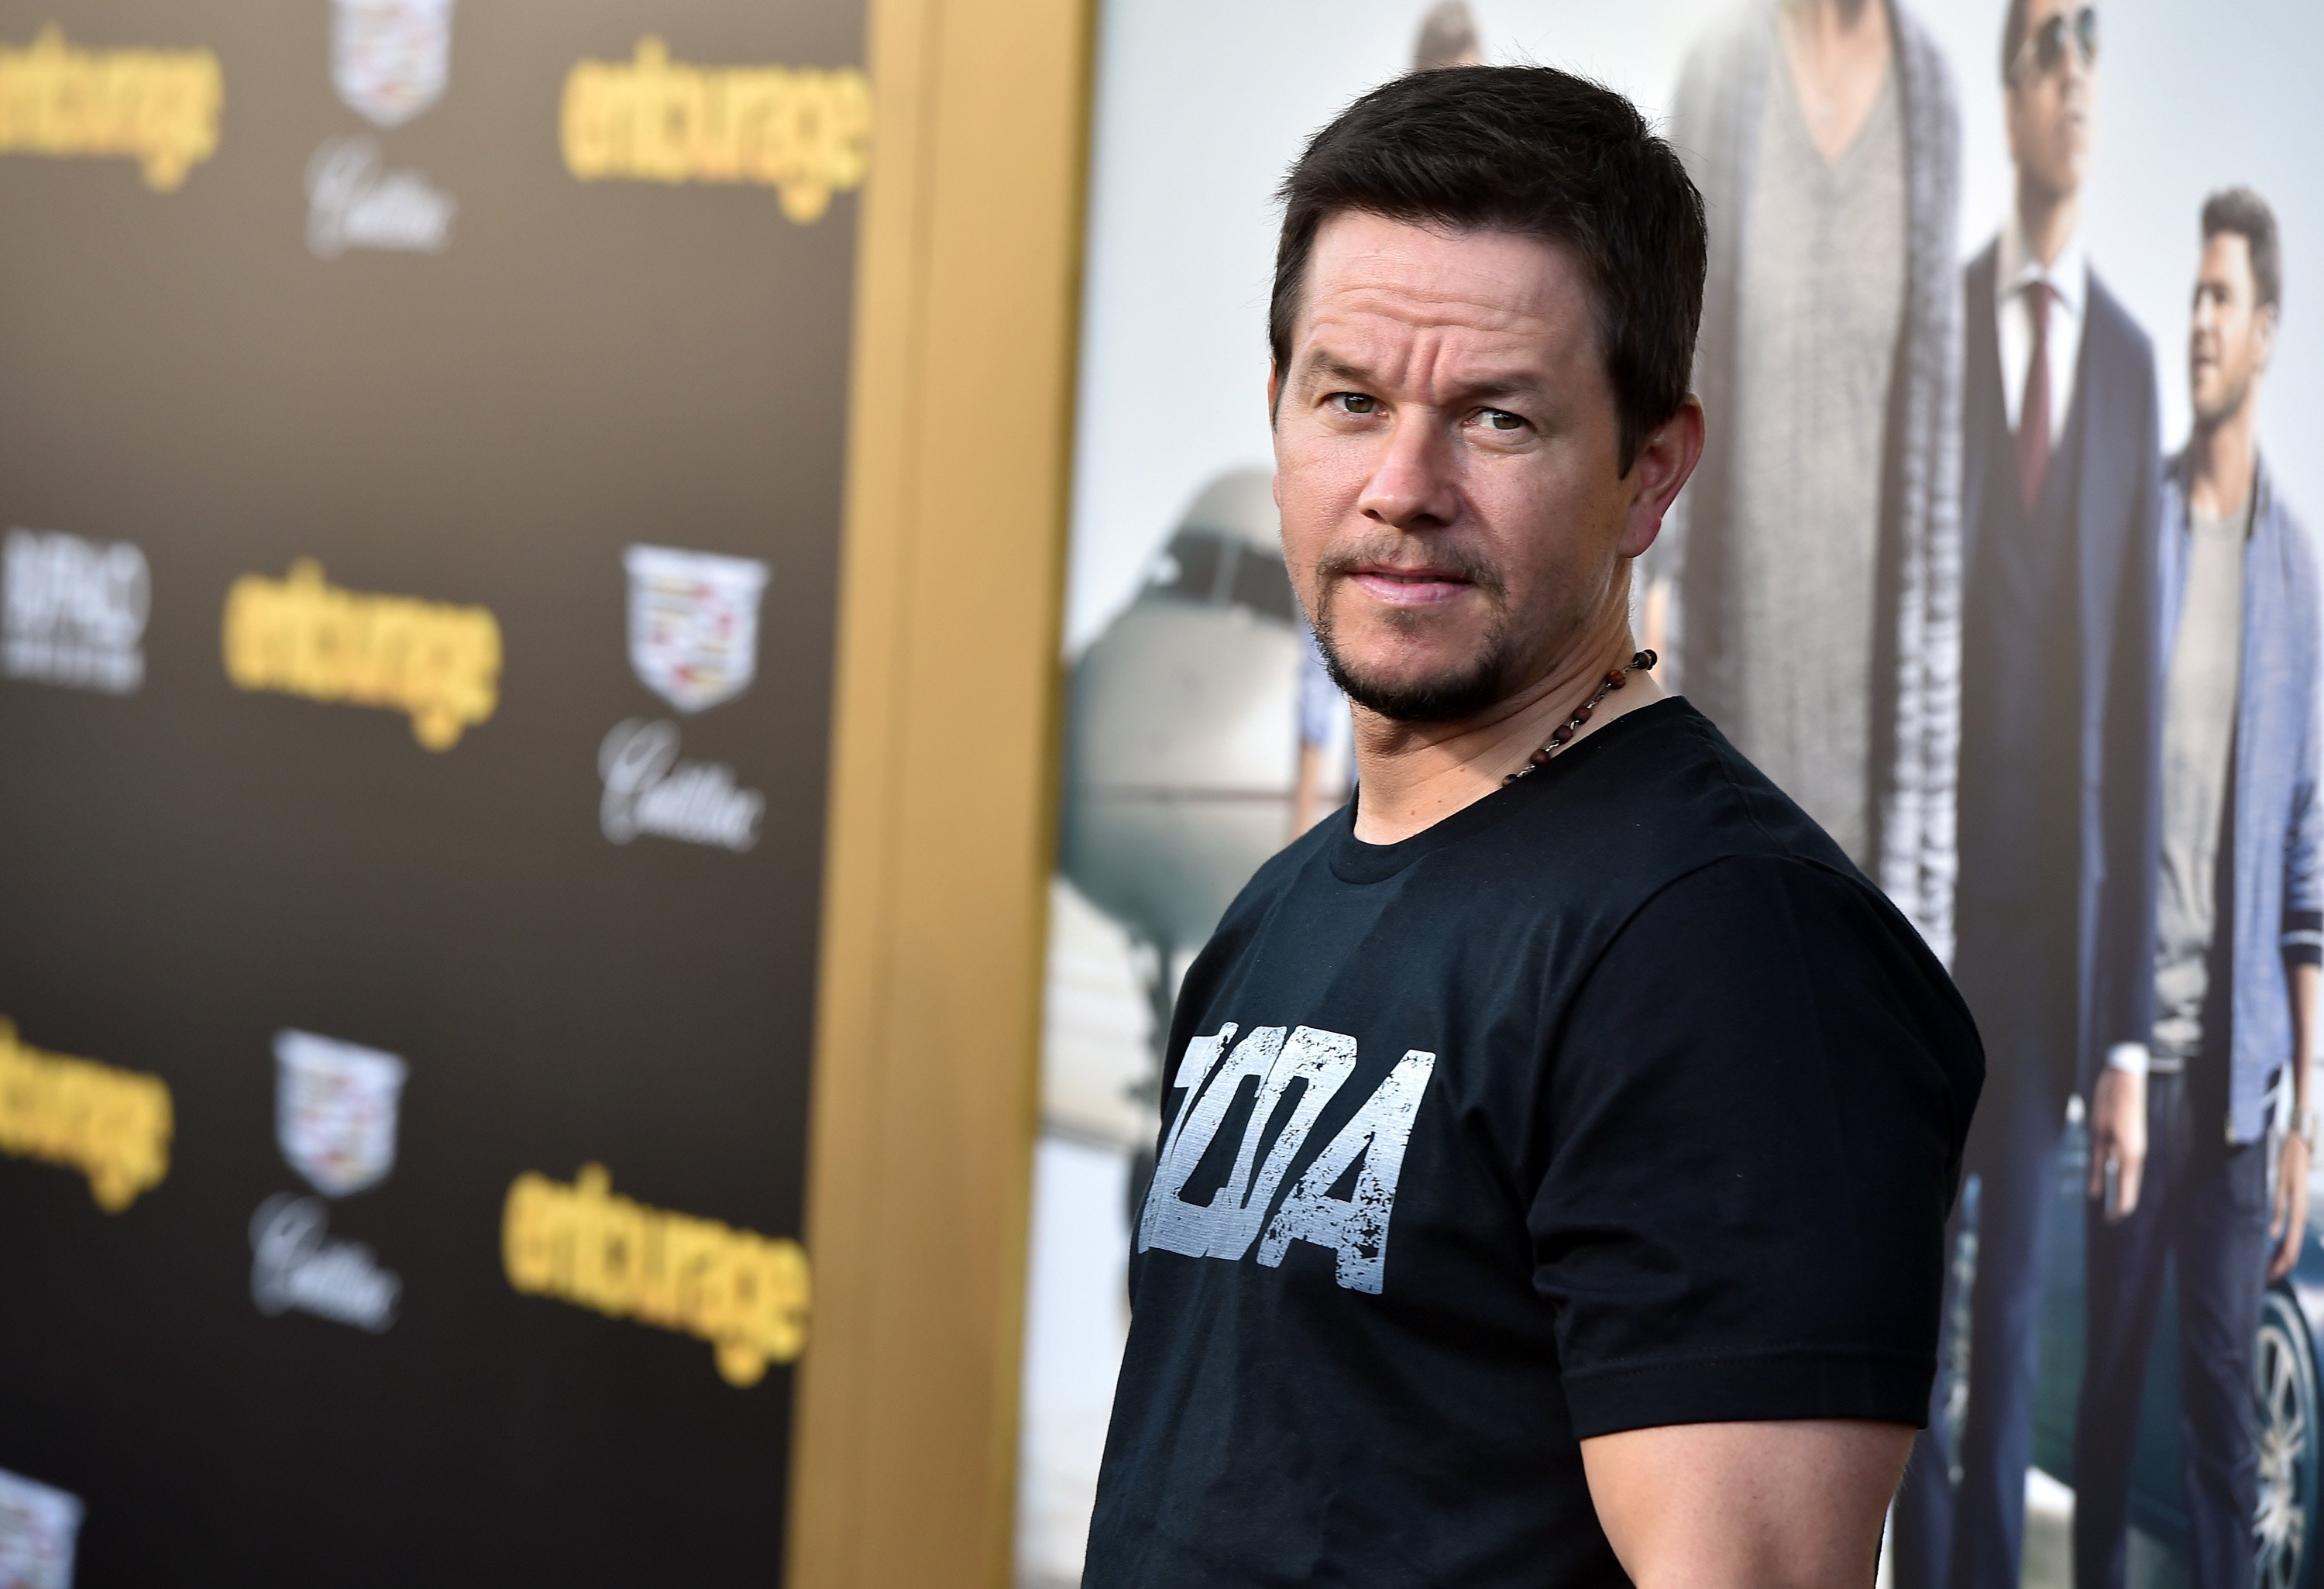 Mark Wahlberg attends the premiere of Warner Bros. Pictures' "Entourage" on June 1, 2015, in Westwood, California. | Photo : Getty Images.